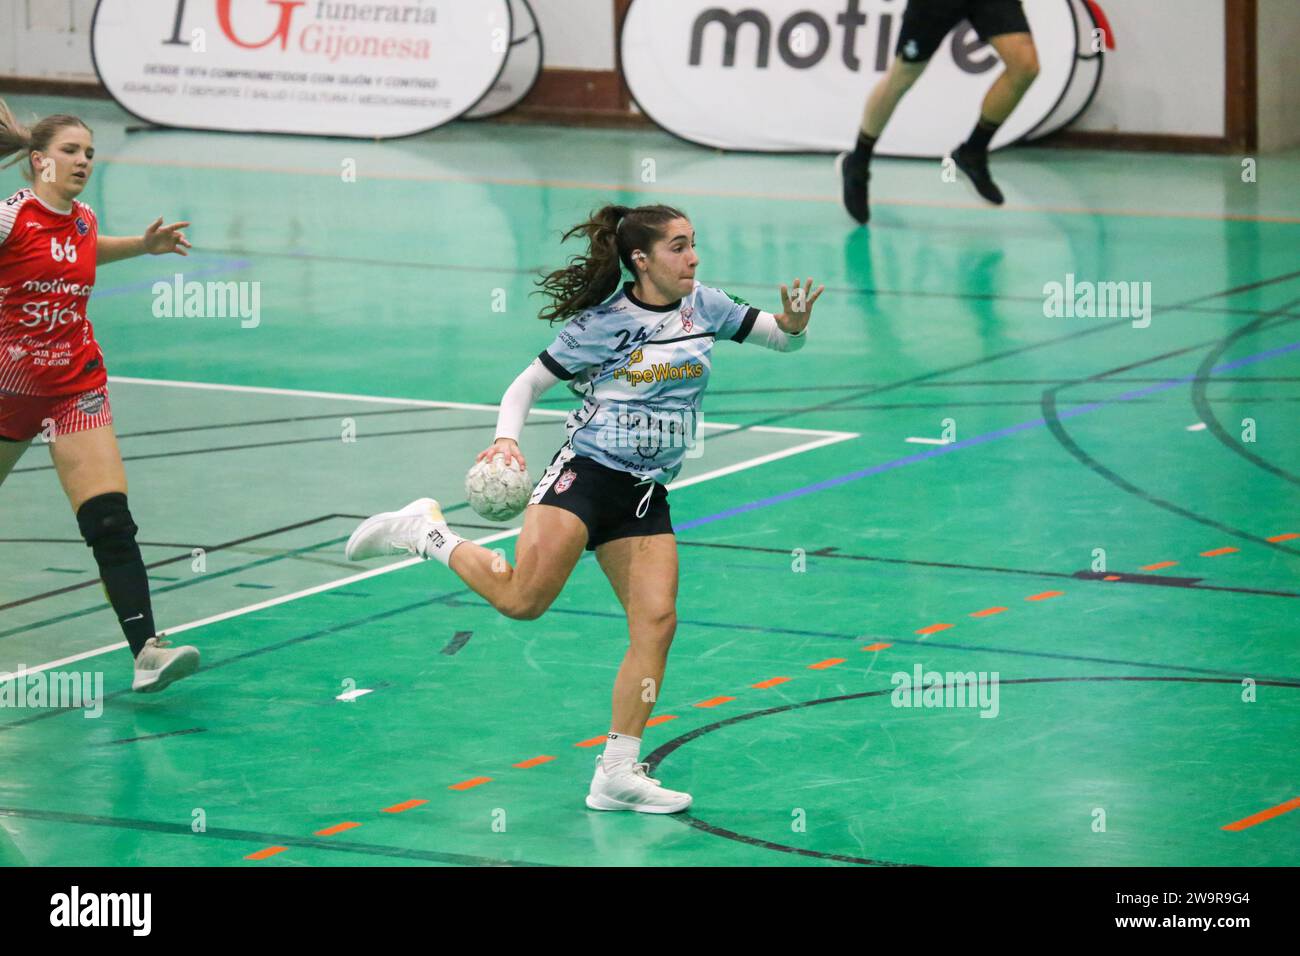 Gijon, Spain, 29th December, 2023: The player of Mecalia Atletico Guardes, Elena Amores (24) with the ball during the 13th matchday of the Liga Guerreras Iberdrola 2023-24 between Motive.co Gijon Balonmano La Calzada and Mecalia Atletico Guardes , on December 29, 2023, at the La Arena Pavilion, in Gijon, Spain. Credit: Alberto Brevers / Alamy Live News. Stock Photo